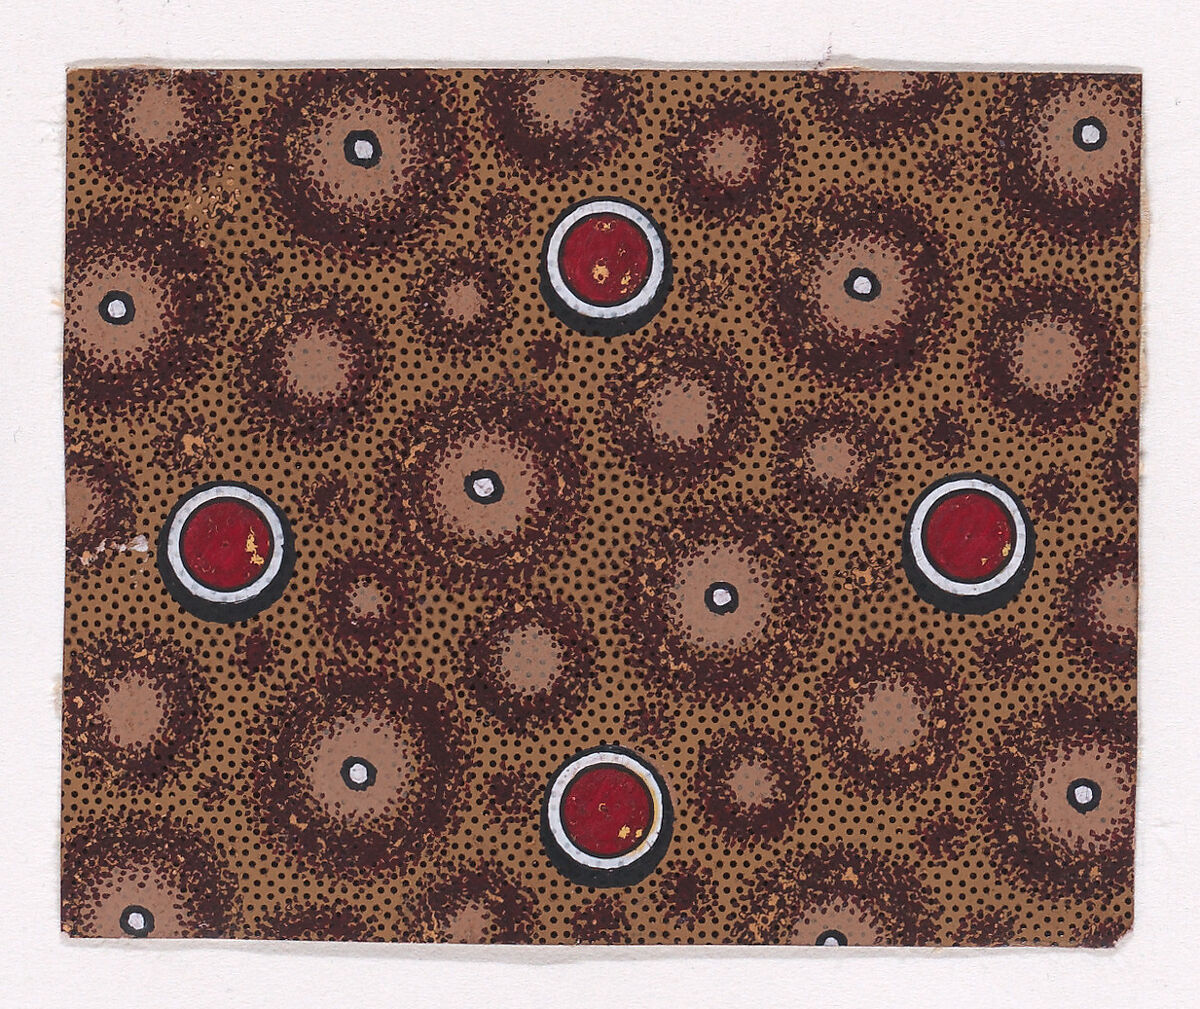 Textile Design with Circles and Pearls over a Stippled Background, Anonymous, Alsatian, 19th century, Gouache 